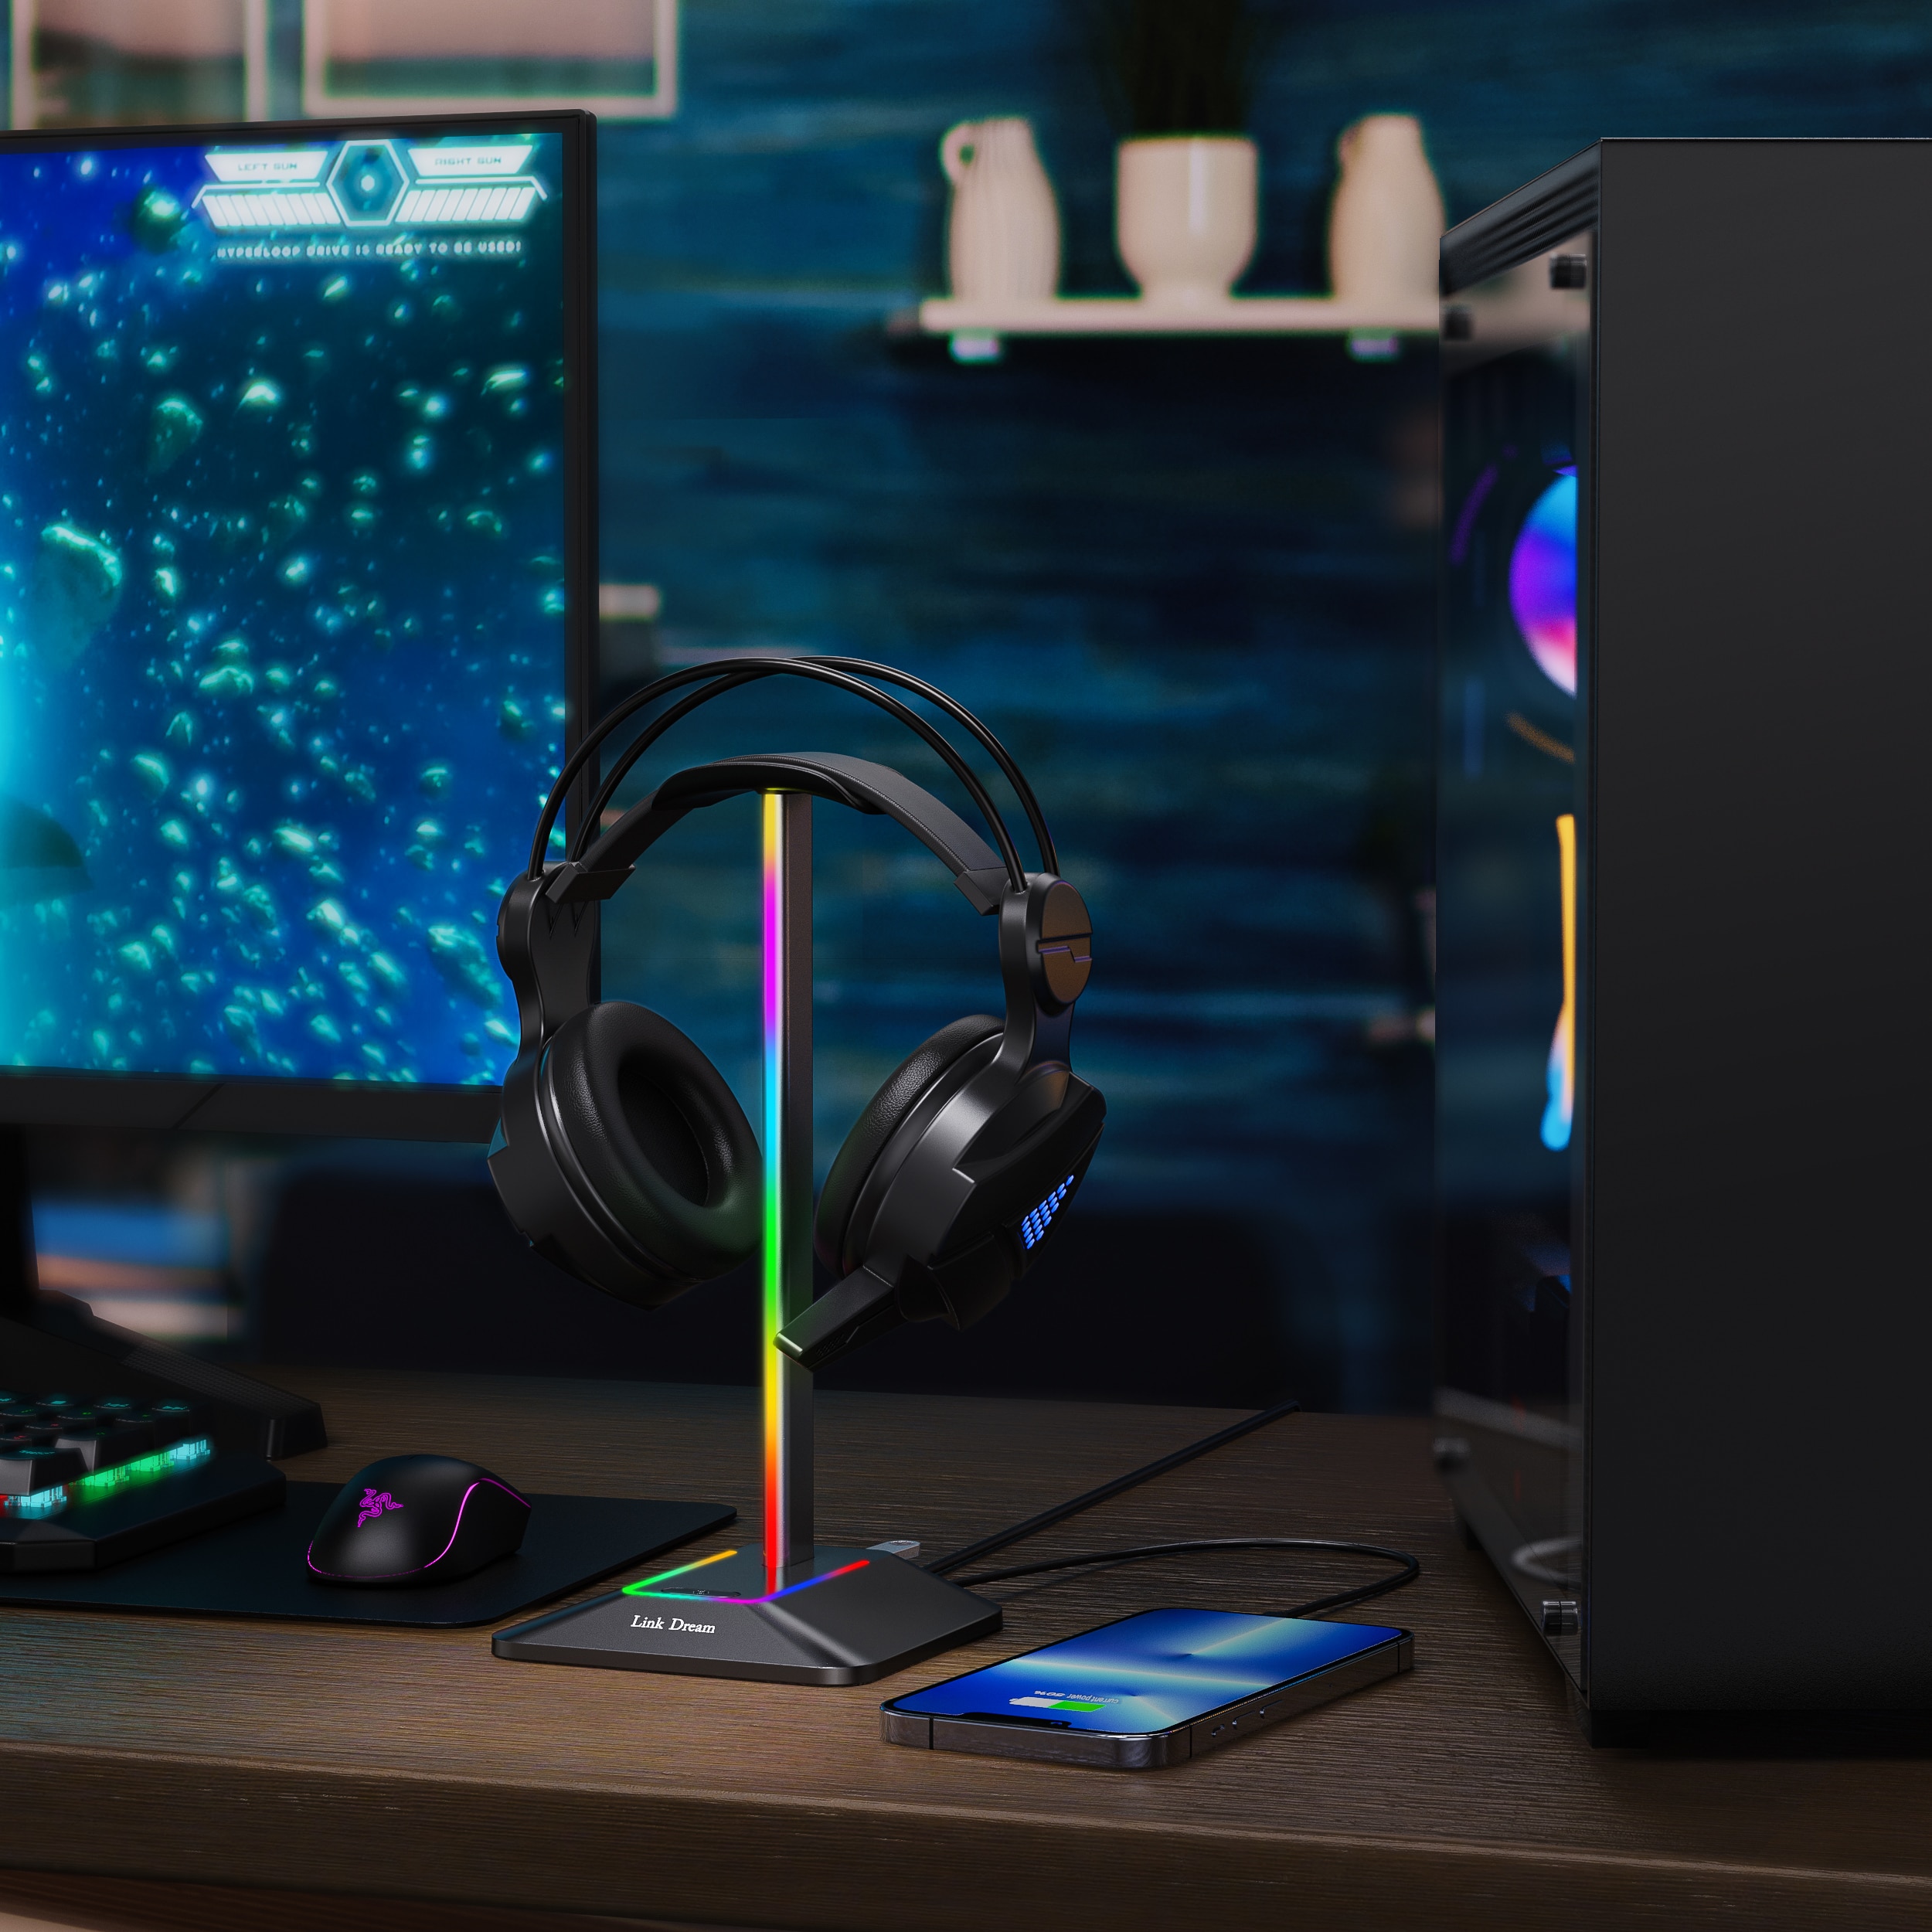 RGB Headphone Stand with USB Ports - Perfect for Gamers!